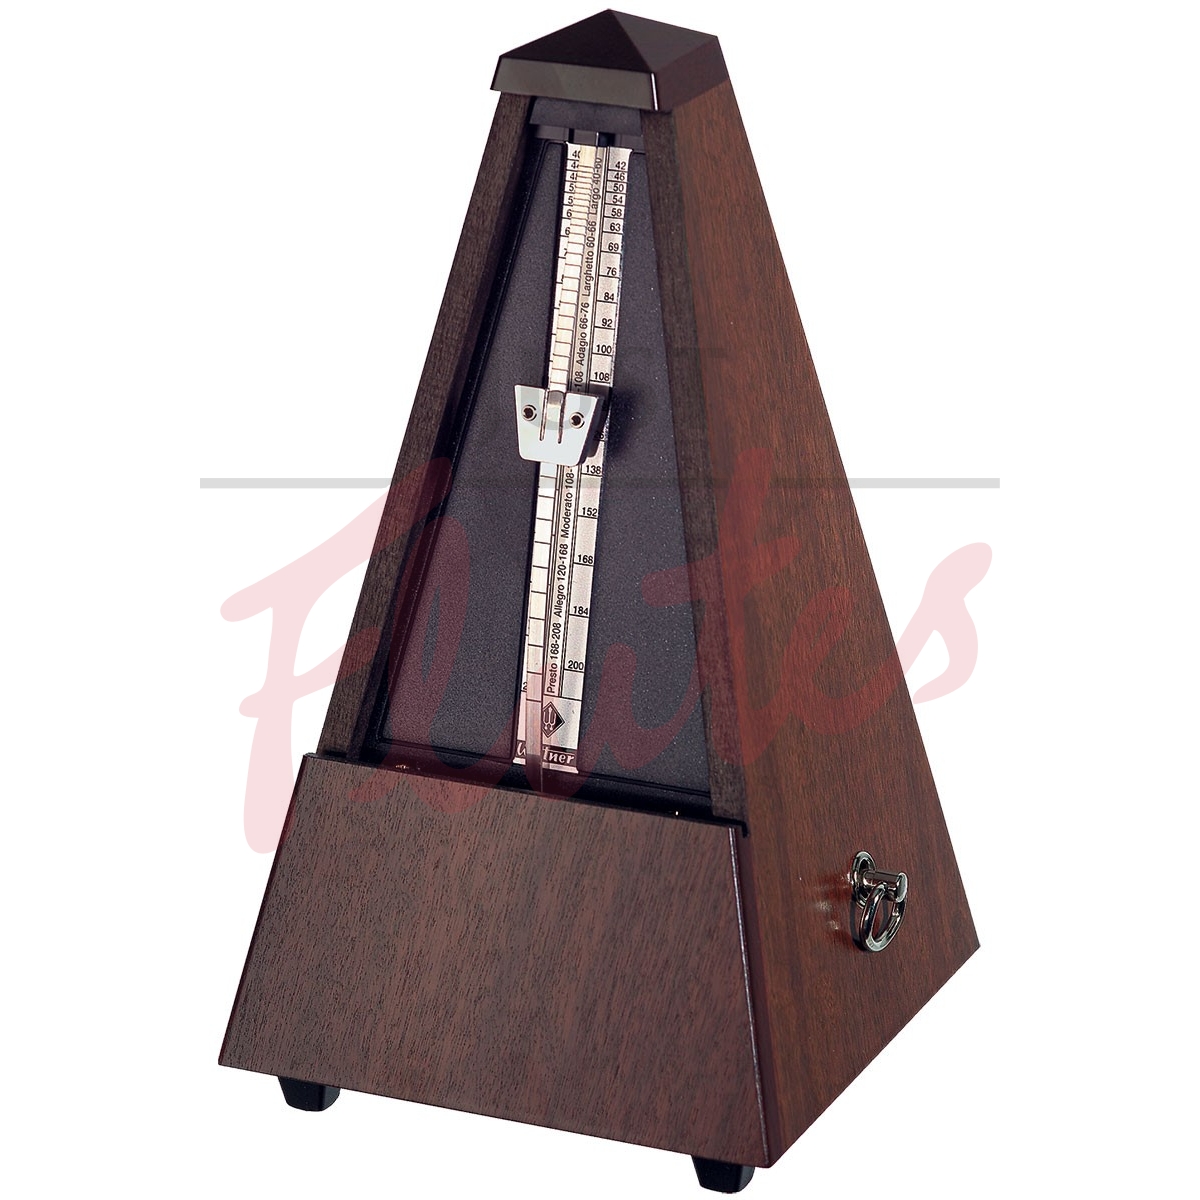 Wittner 804 Pyramid Metronome, Solid Wood, Highly-Polished Walnut